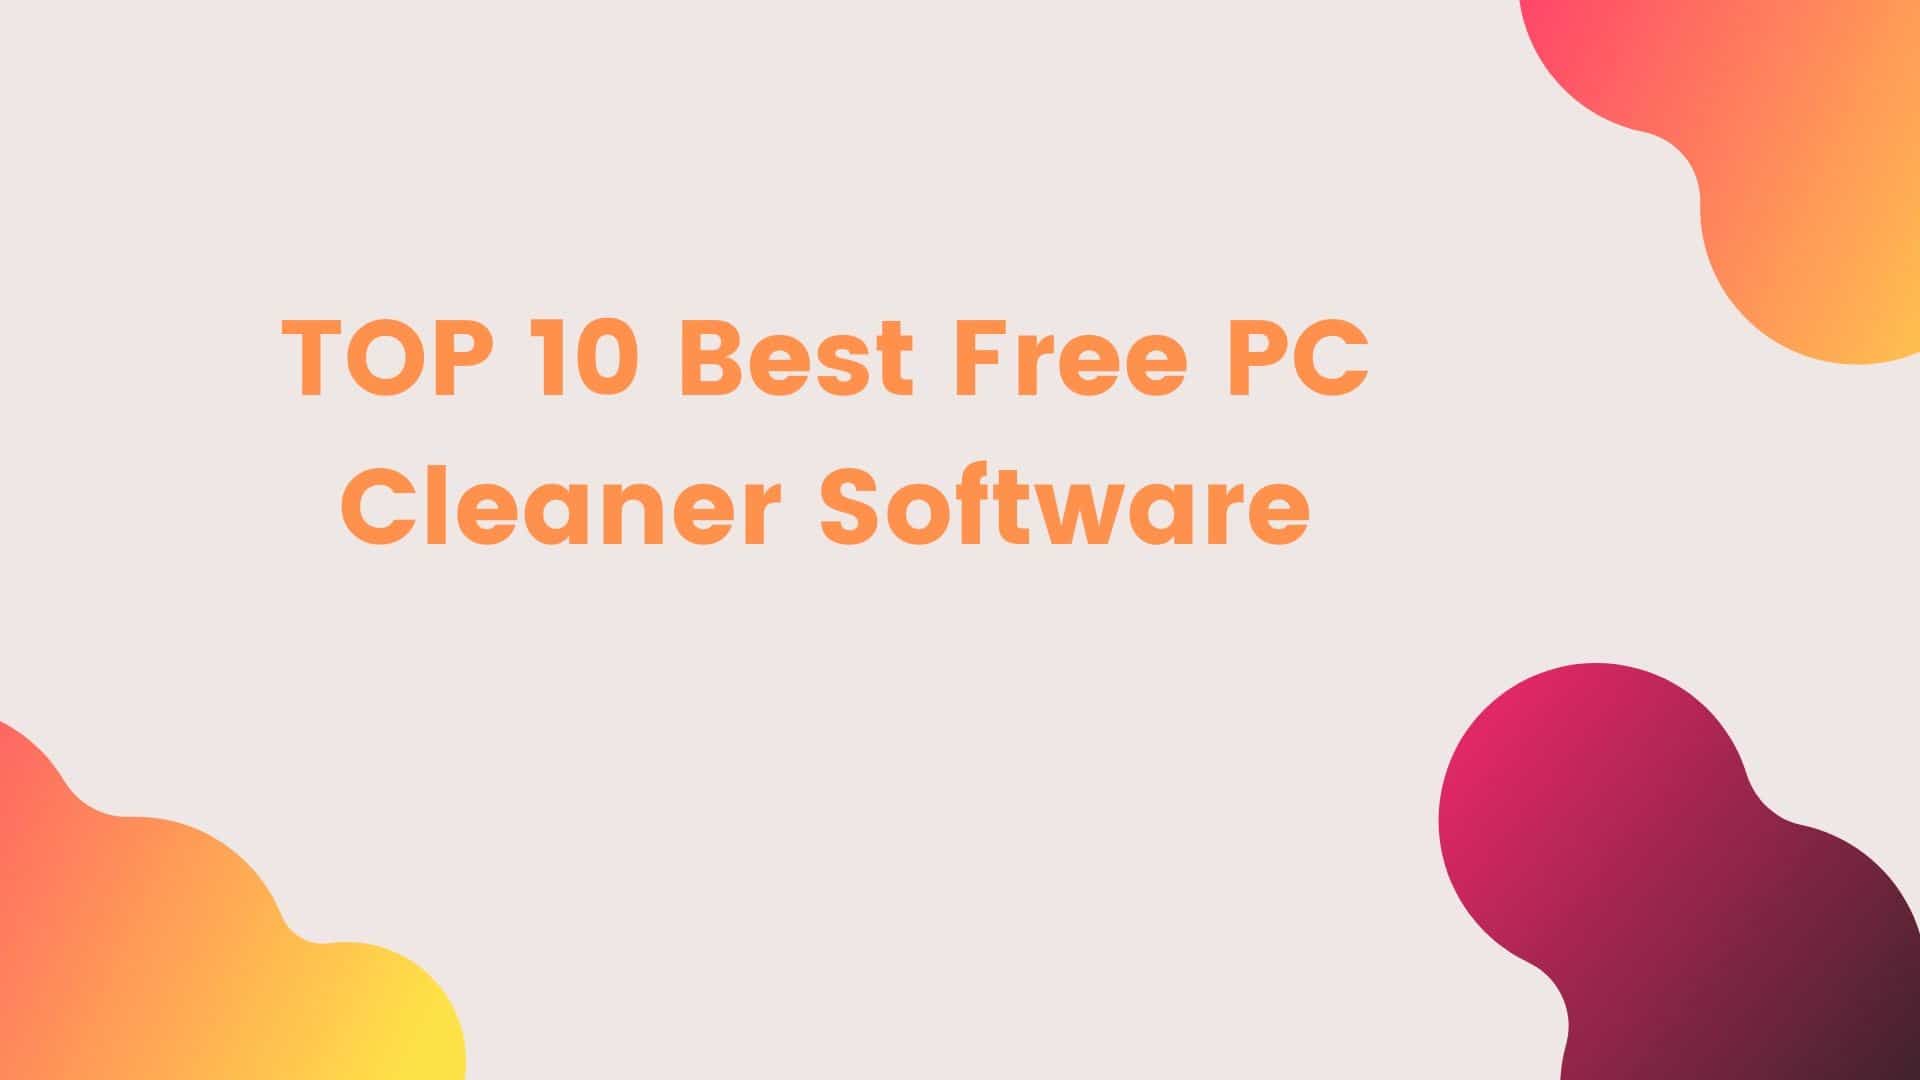 TOP 10 Best Free PC Cleaner Software